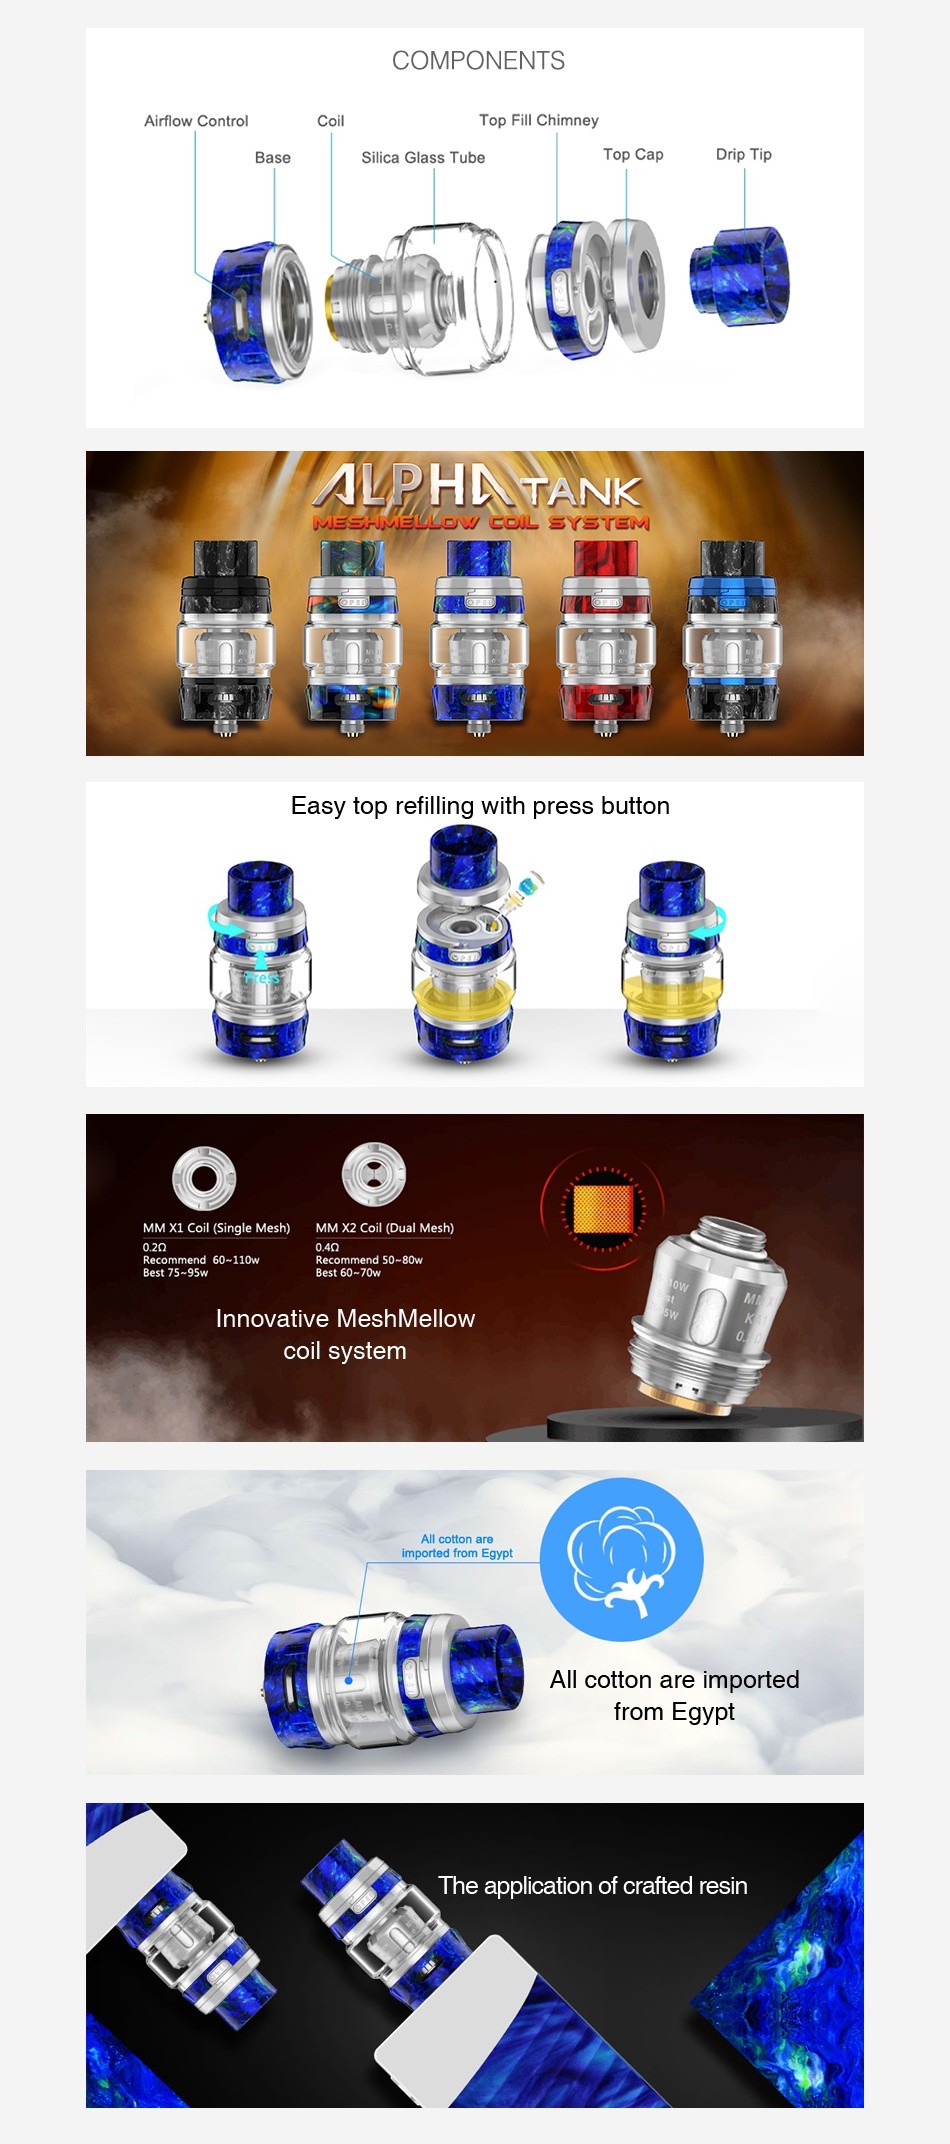 Geekvape Alpha Subohm Tank 2ml/4ml COMPONENTS Coil Top Fill Chi Base Silica Glass Tube Top Cap Drip t ALPHNTANK s    N Easy top refilling with press button M X1 Coil  Sing e Mesh  MM X2 Coil  Dual Mesh 02 Recommend 60 110w Recommend 50 80w Best Innovative MeshMellow coil system cotton are impo from egypt The application of crafted resin